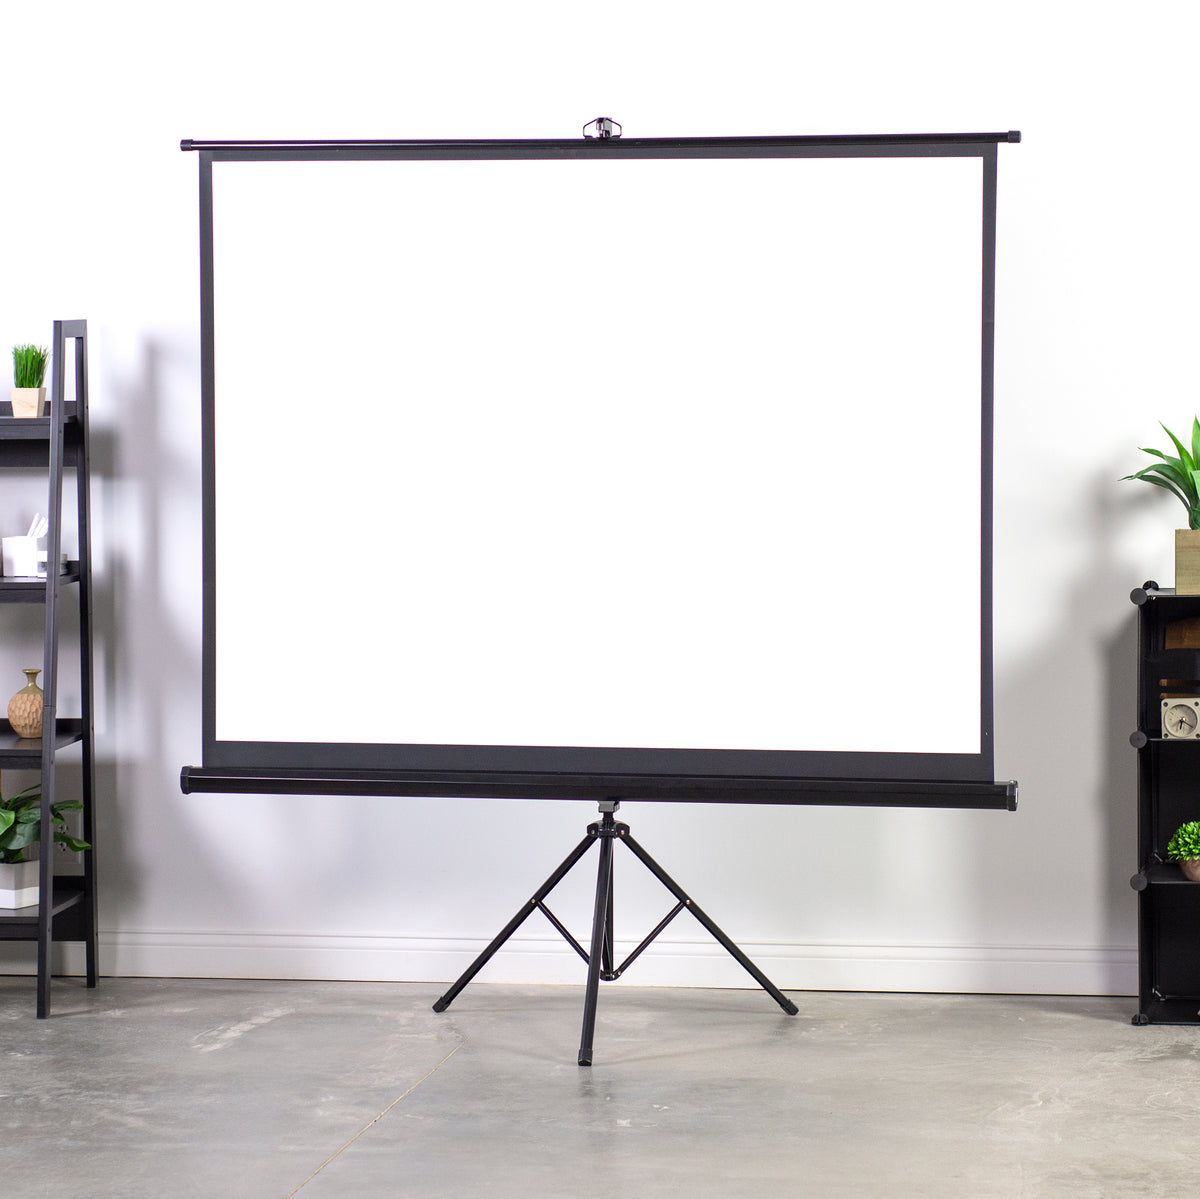 16:9 Format 84 inch for Mobile Presentation and Home Entertainment 19.7 lbs Heavy Duty 4K Ultra HD Ready Adjustable Tripod and Wall Delux Screens 84 Portable Projector Screen with Stand